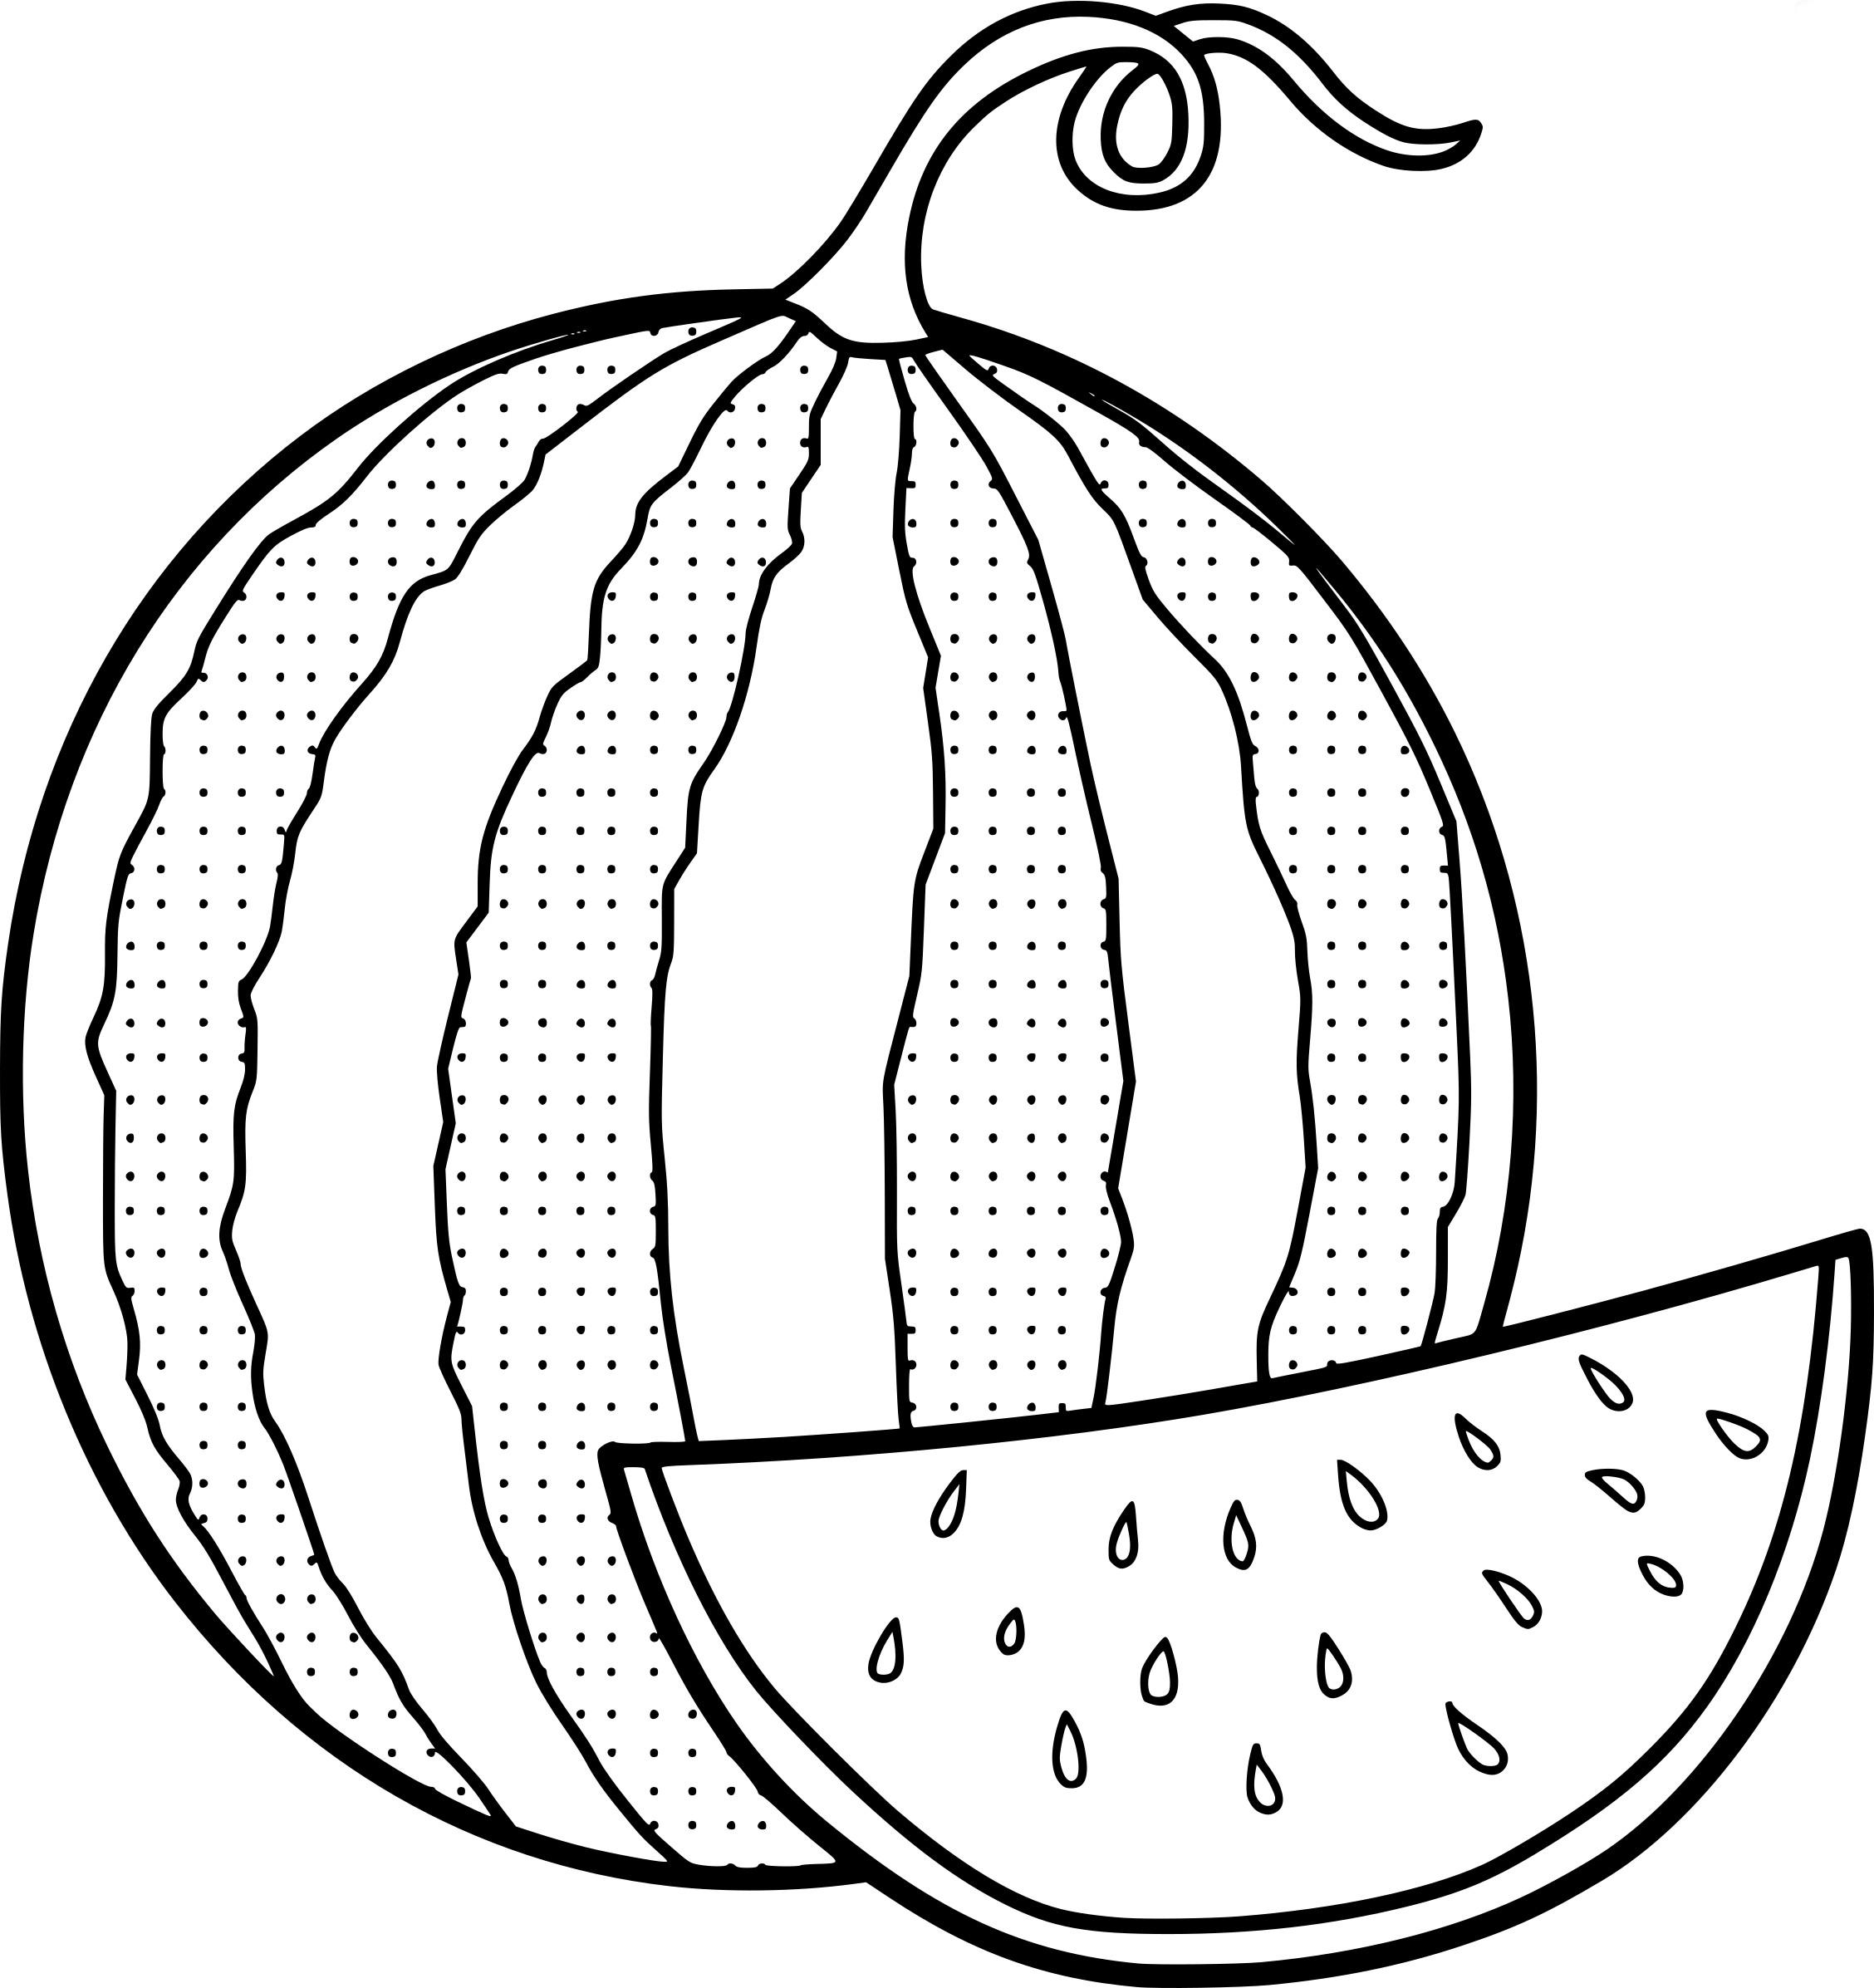 Watermelon Coloring Pages - Best Coloring Pages For Kids - Coloring Home